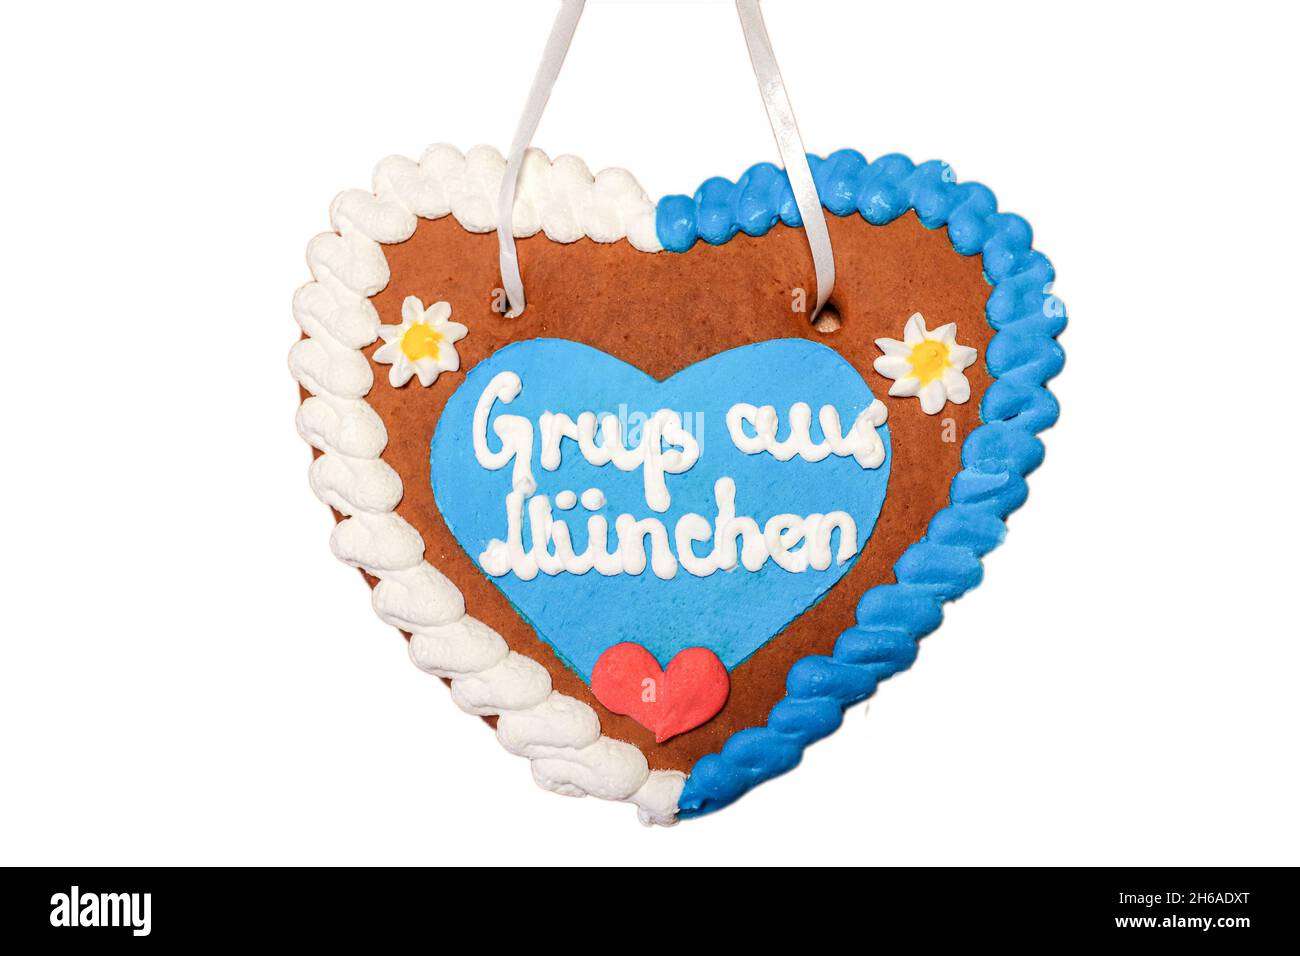 Couple Lovers Grusse aus Greetings from 